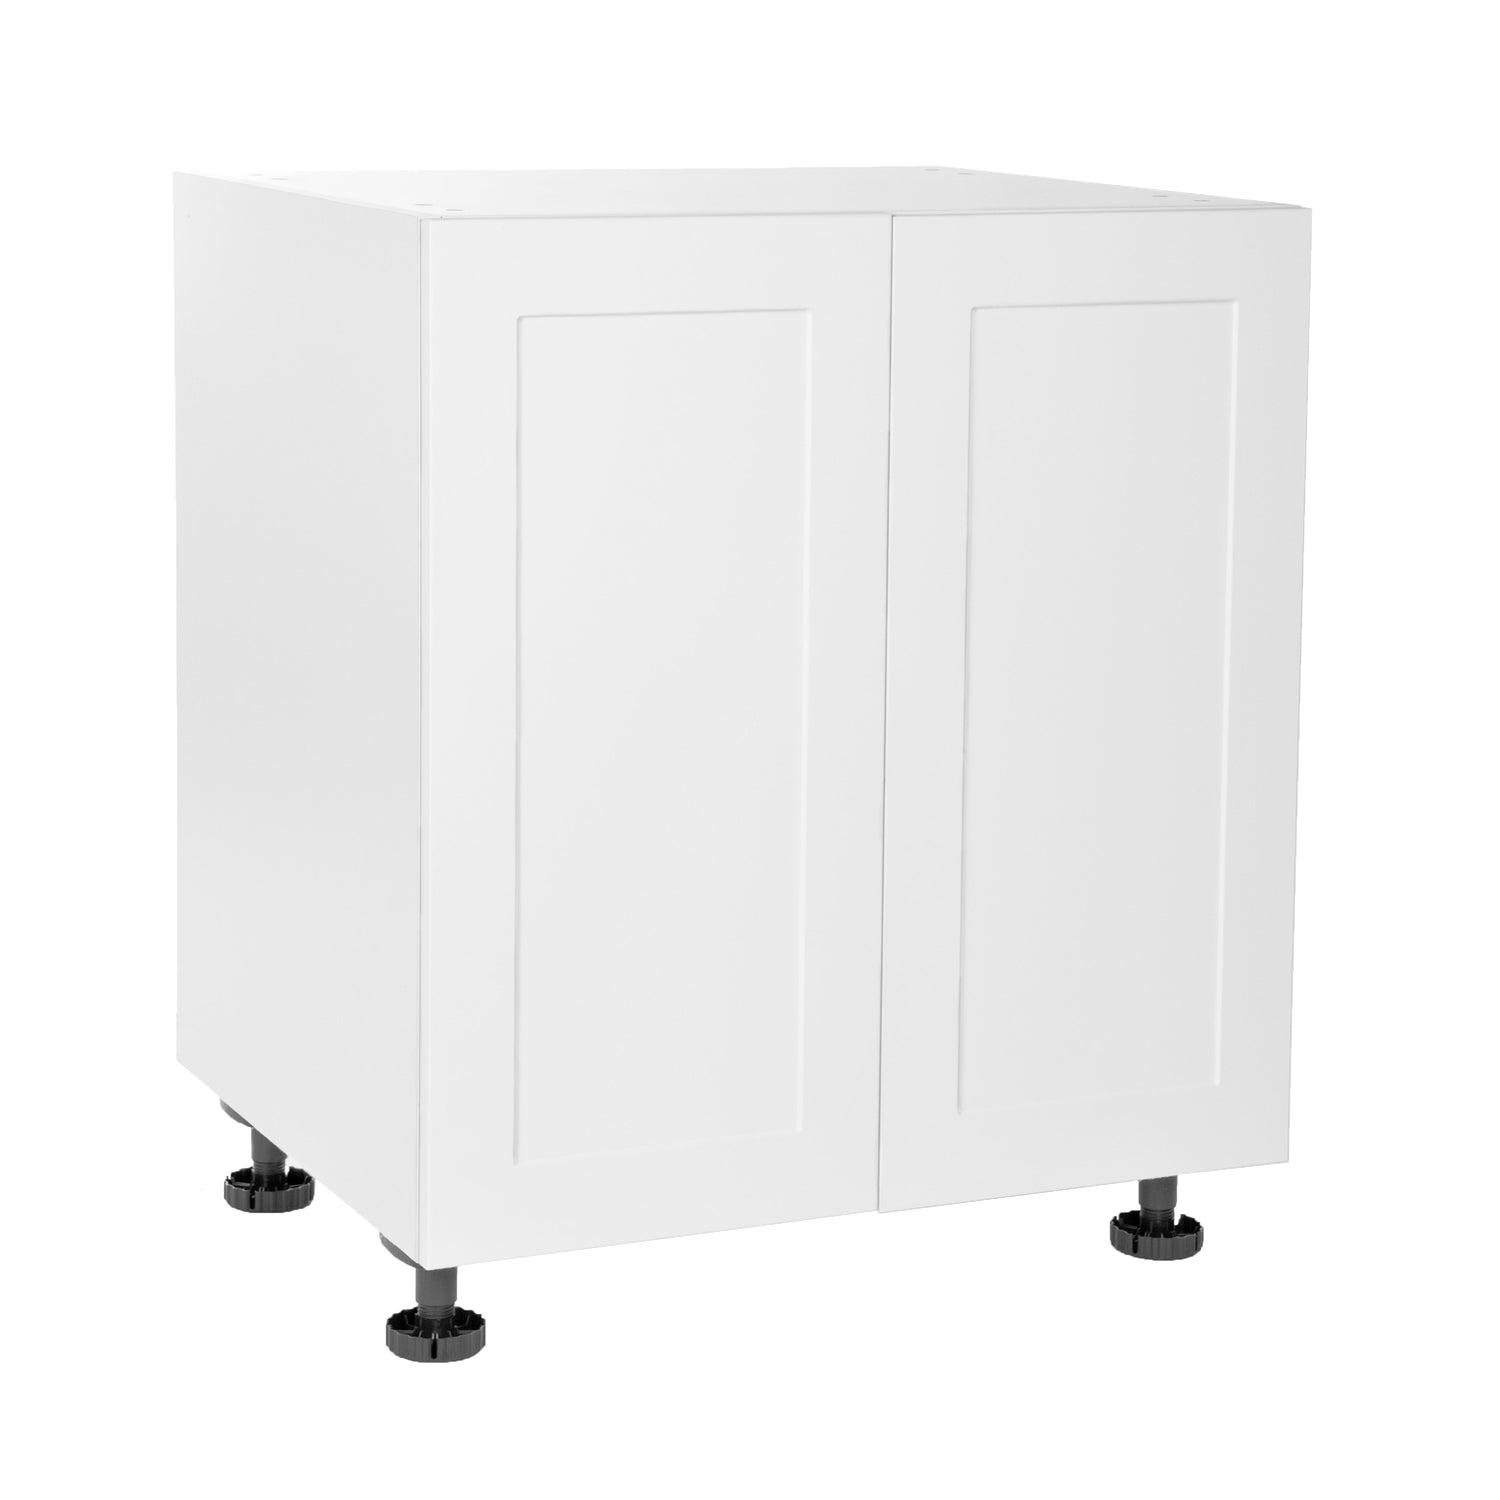 Quick Assemble Modern Style with Soft Close, White Shaker Base Kitchen Cabinet, 2 Door (33 in W x 24 in D x 34.50 in H) -  Pro-Edge HD